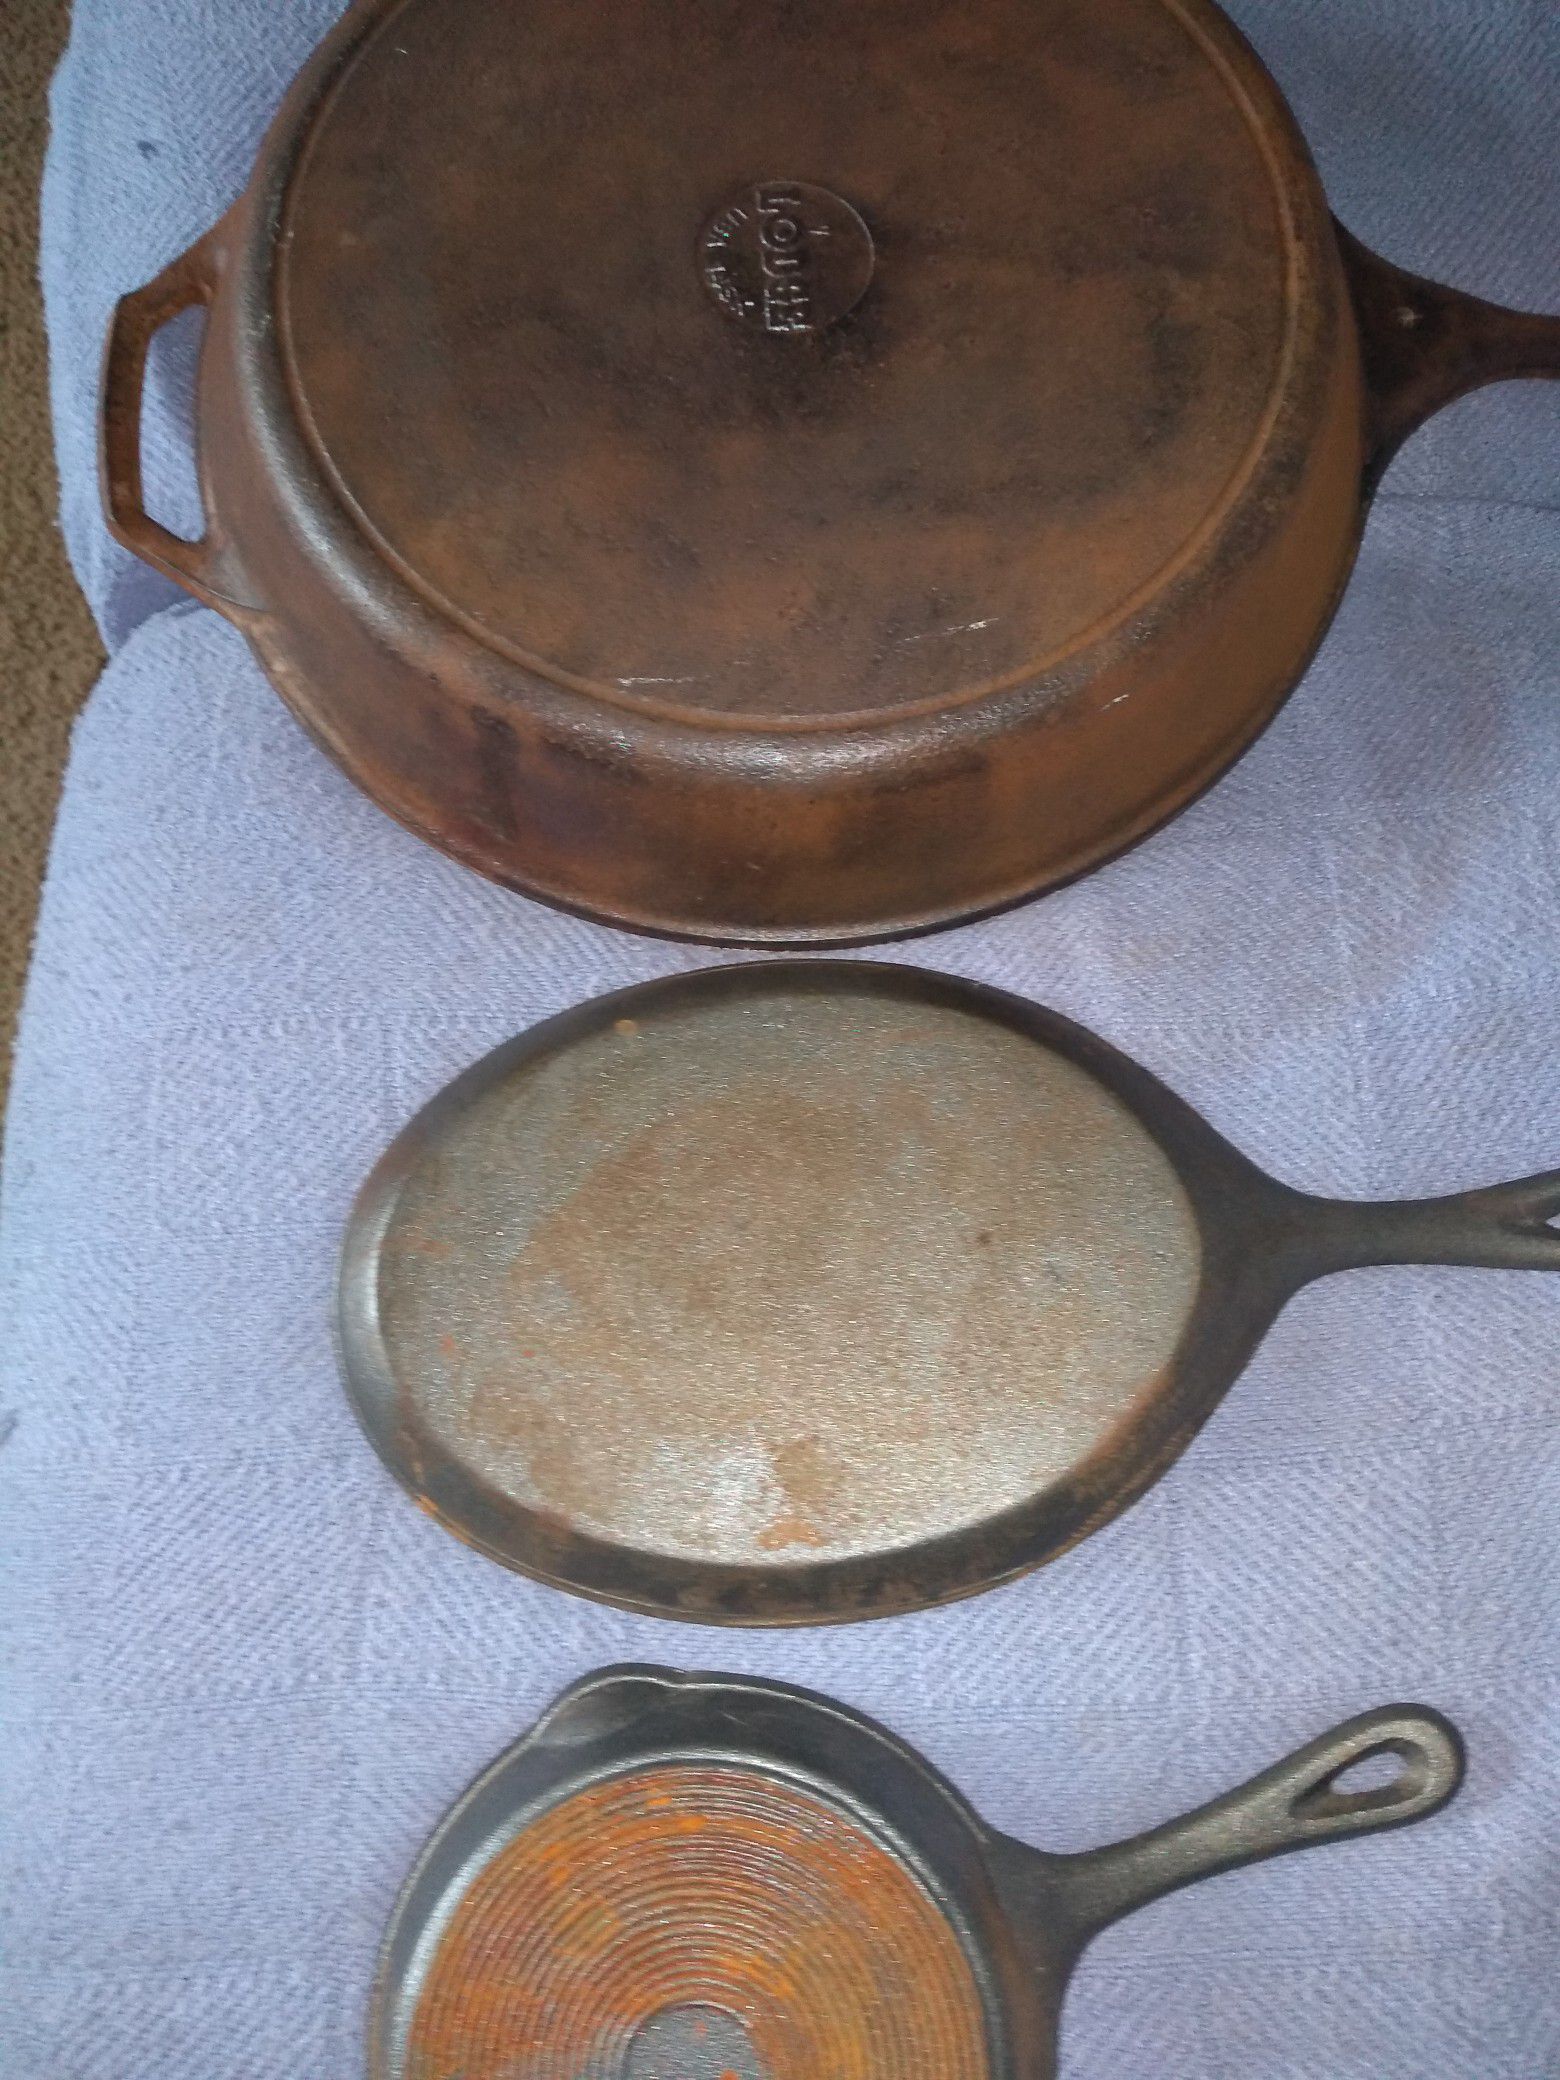 15 inch lodge skillet all 3 for $30